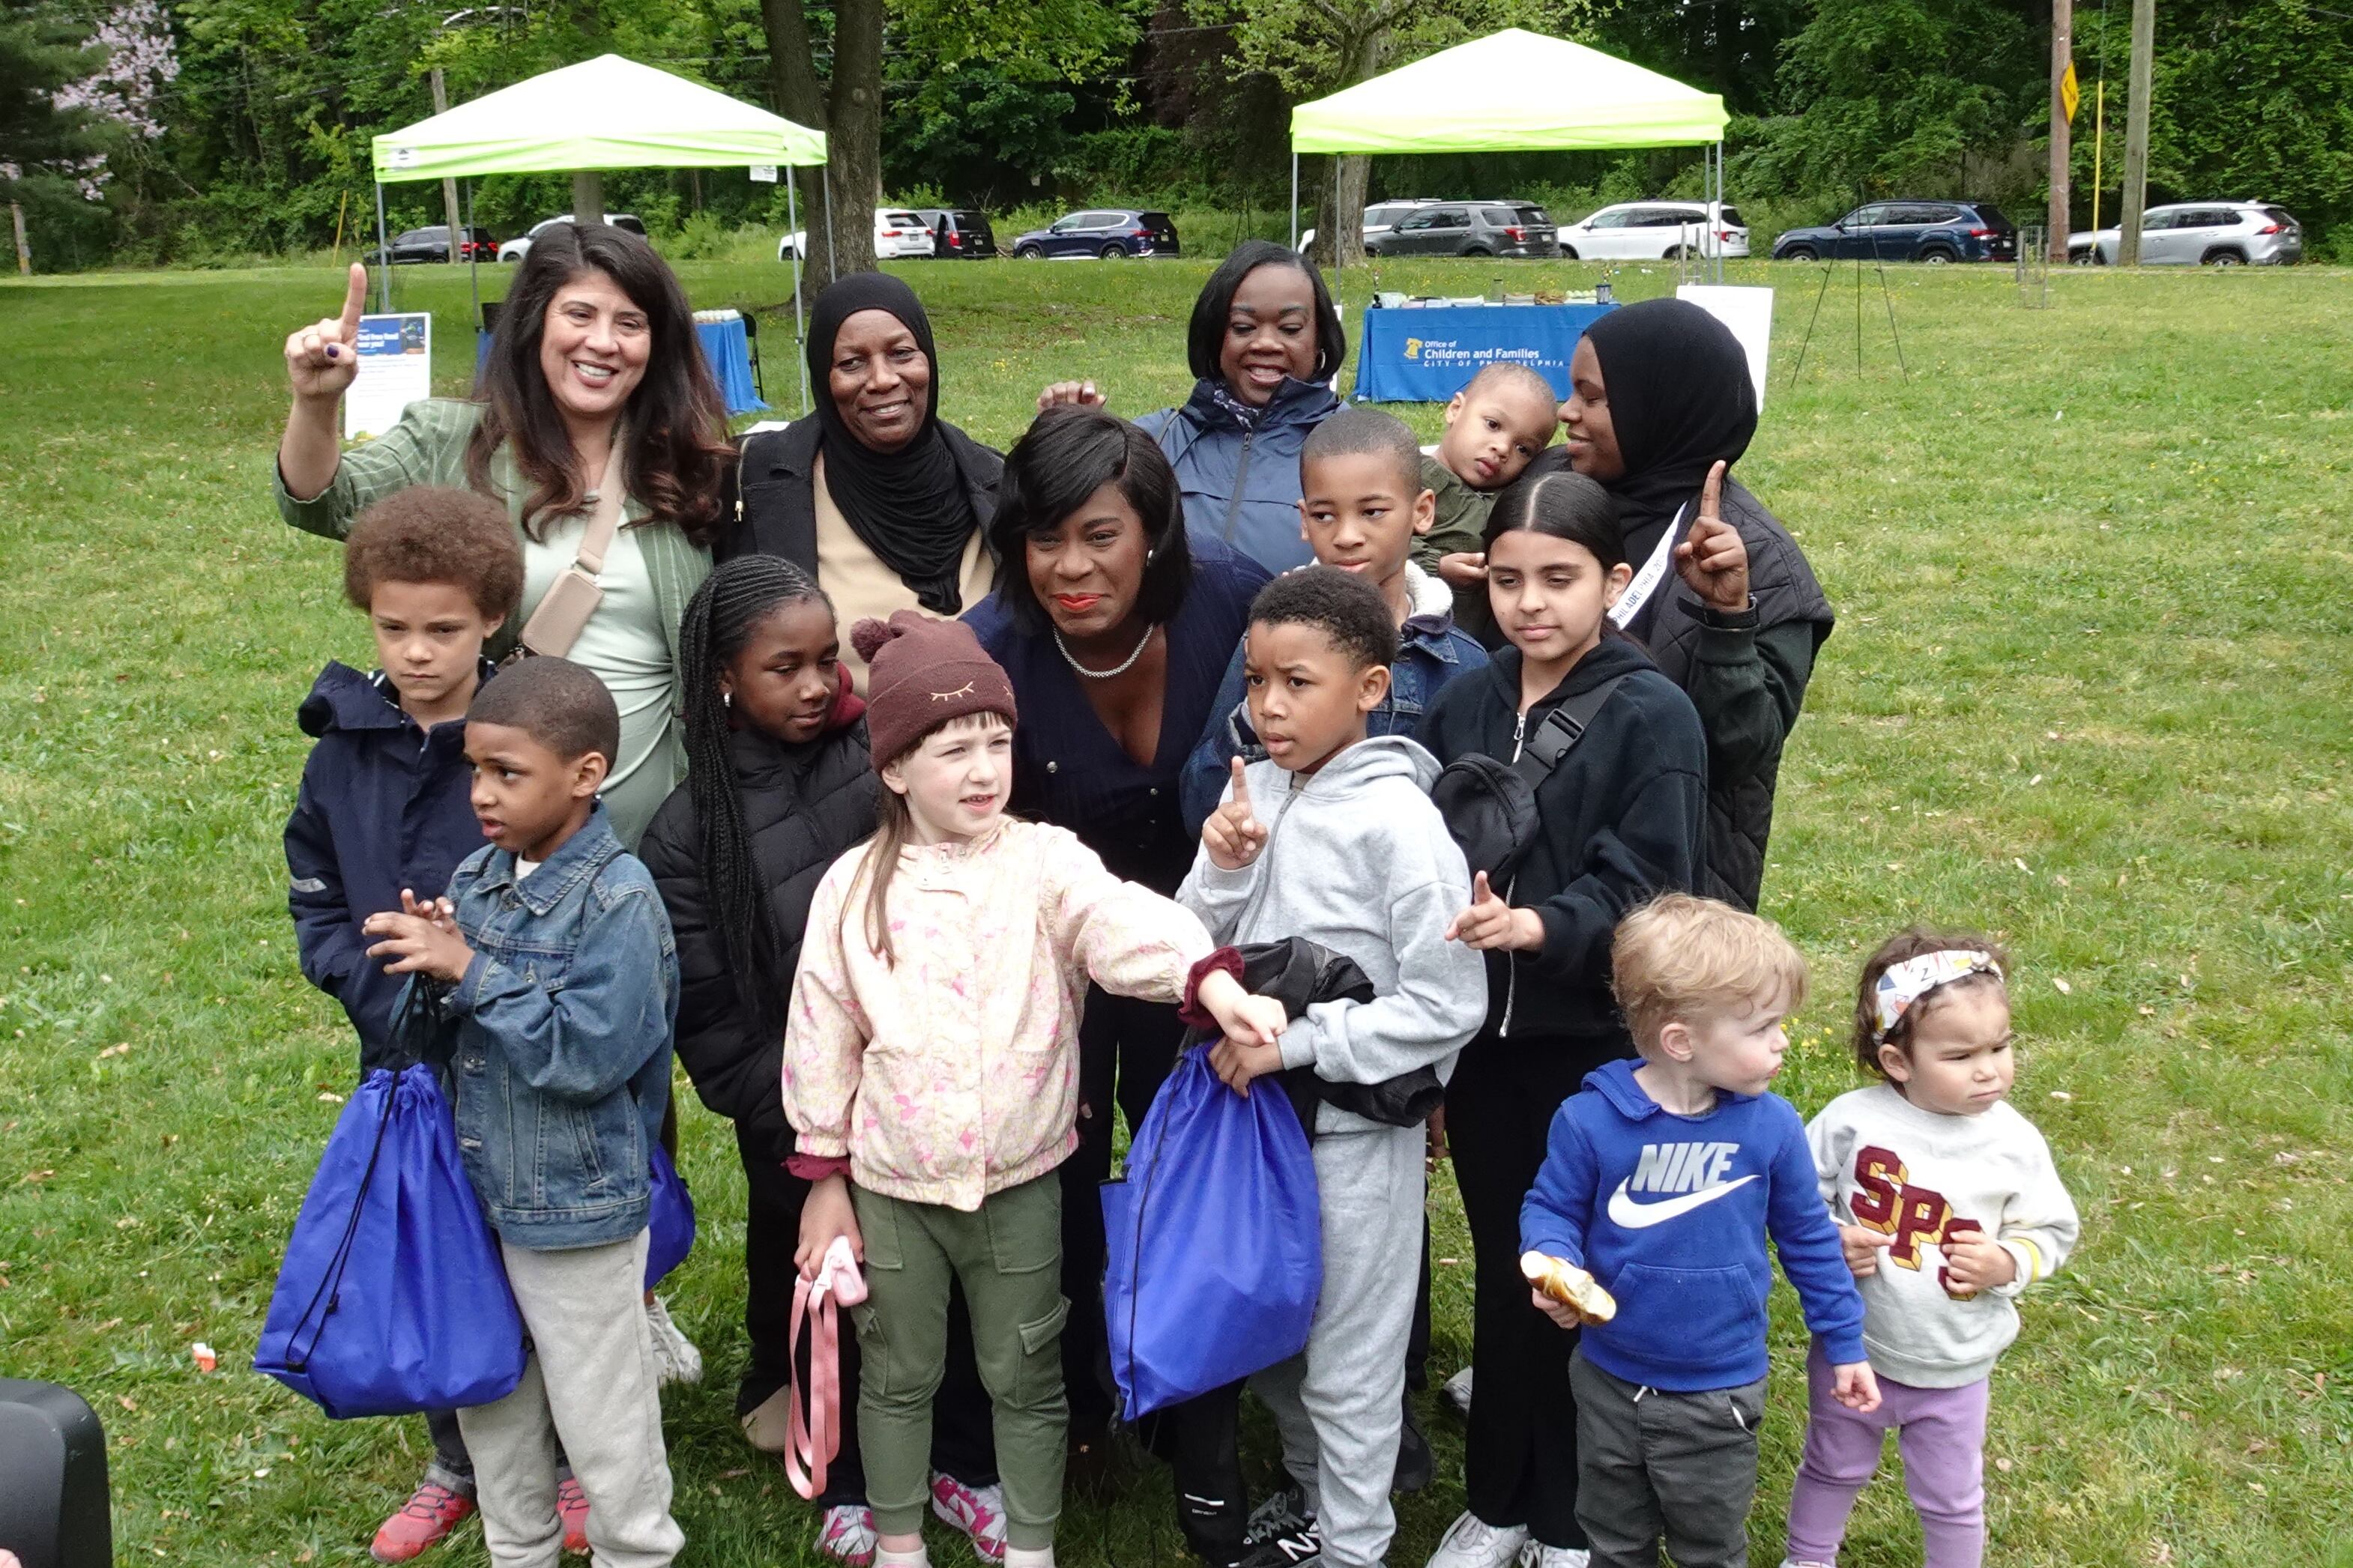 Philadelphia Mayor Cherelle Parker smiles surrounded by a group of young kids and parents in the rain in a park.